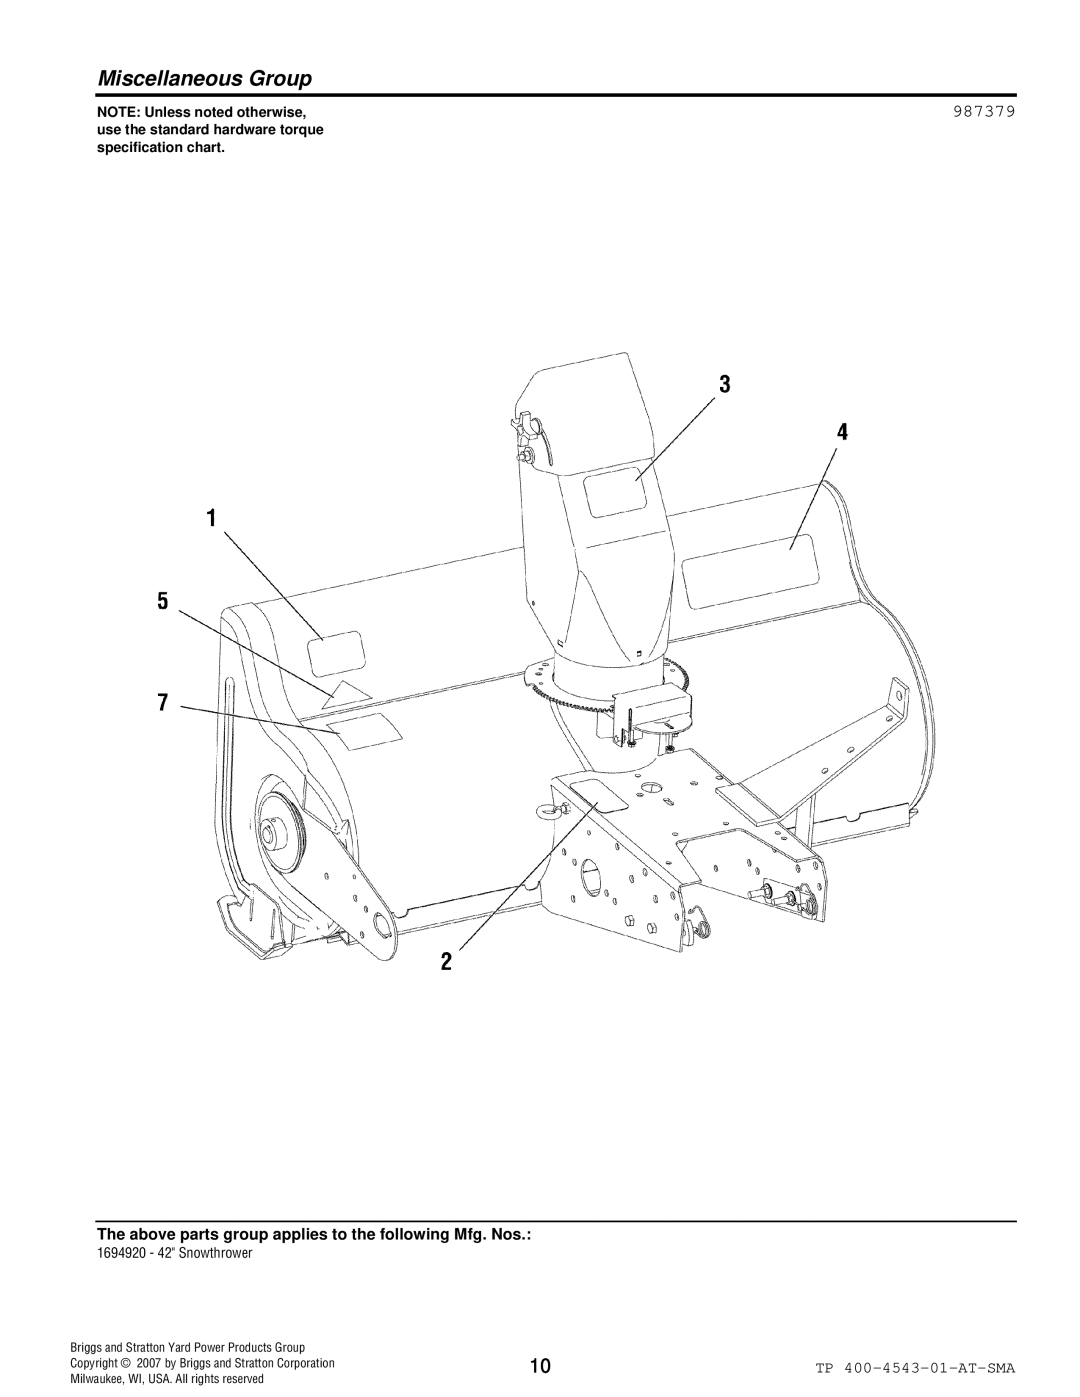 Simplicity 1694920 Miscellaneous Group, 987379, NOTE Unless noted otherwise, Briggs and Stratton Yard Power Products Group 